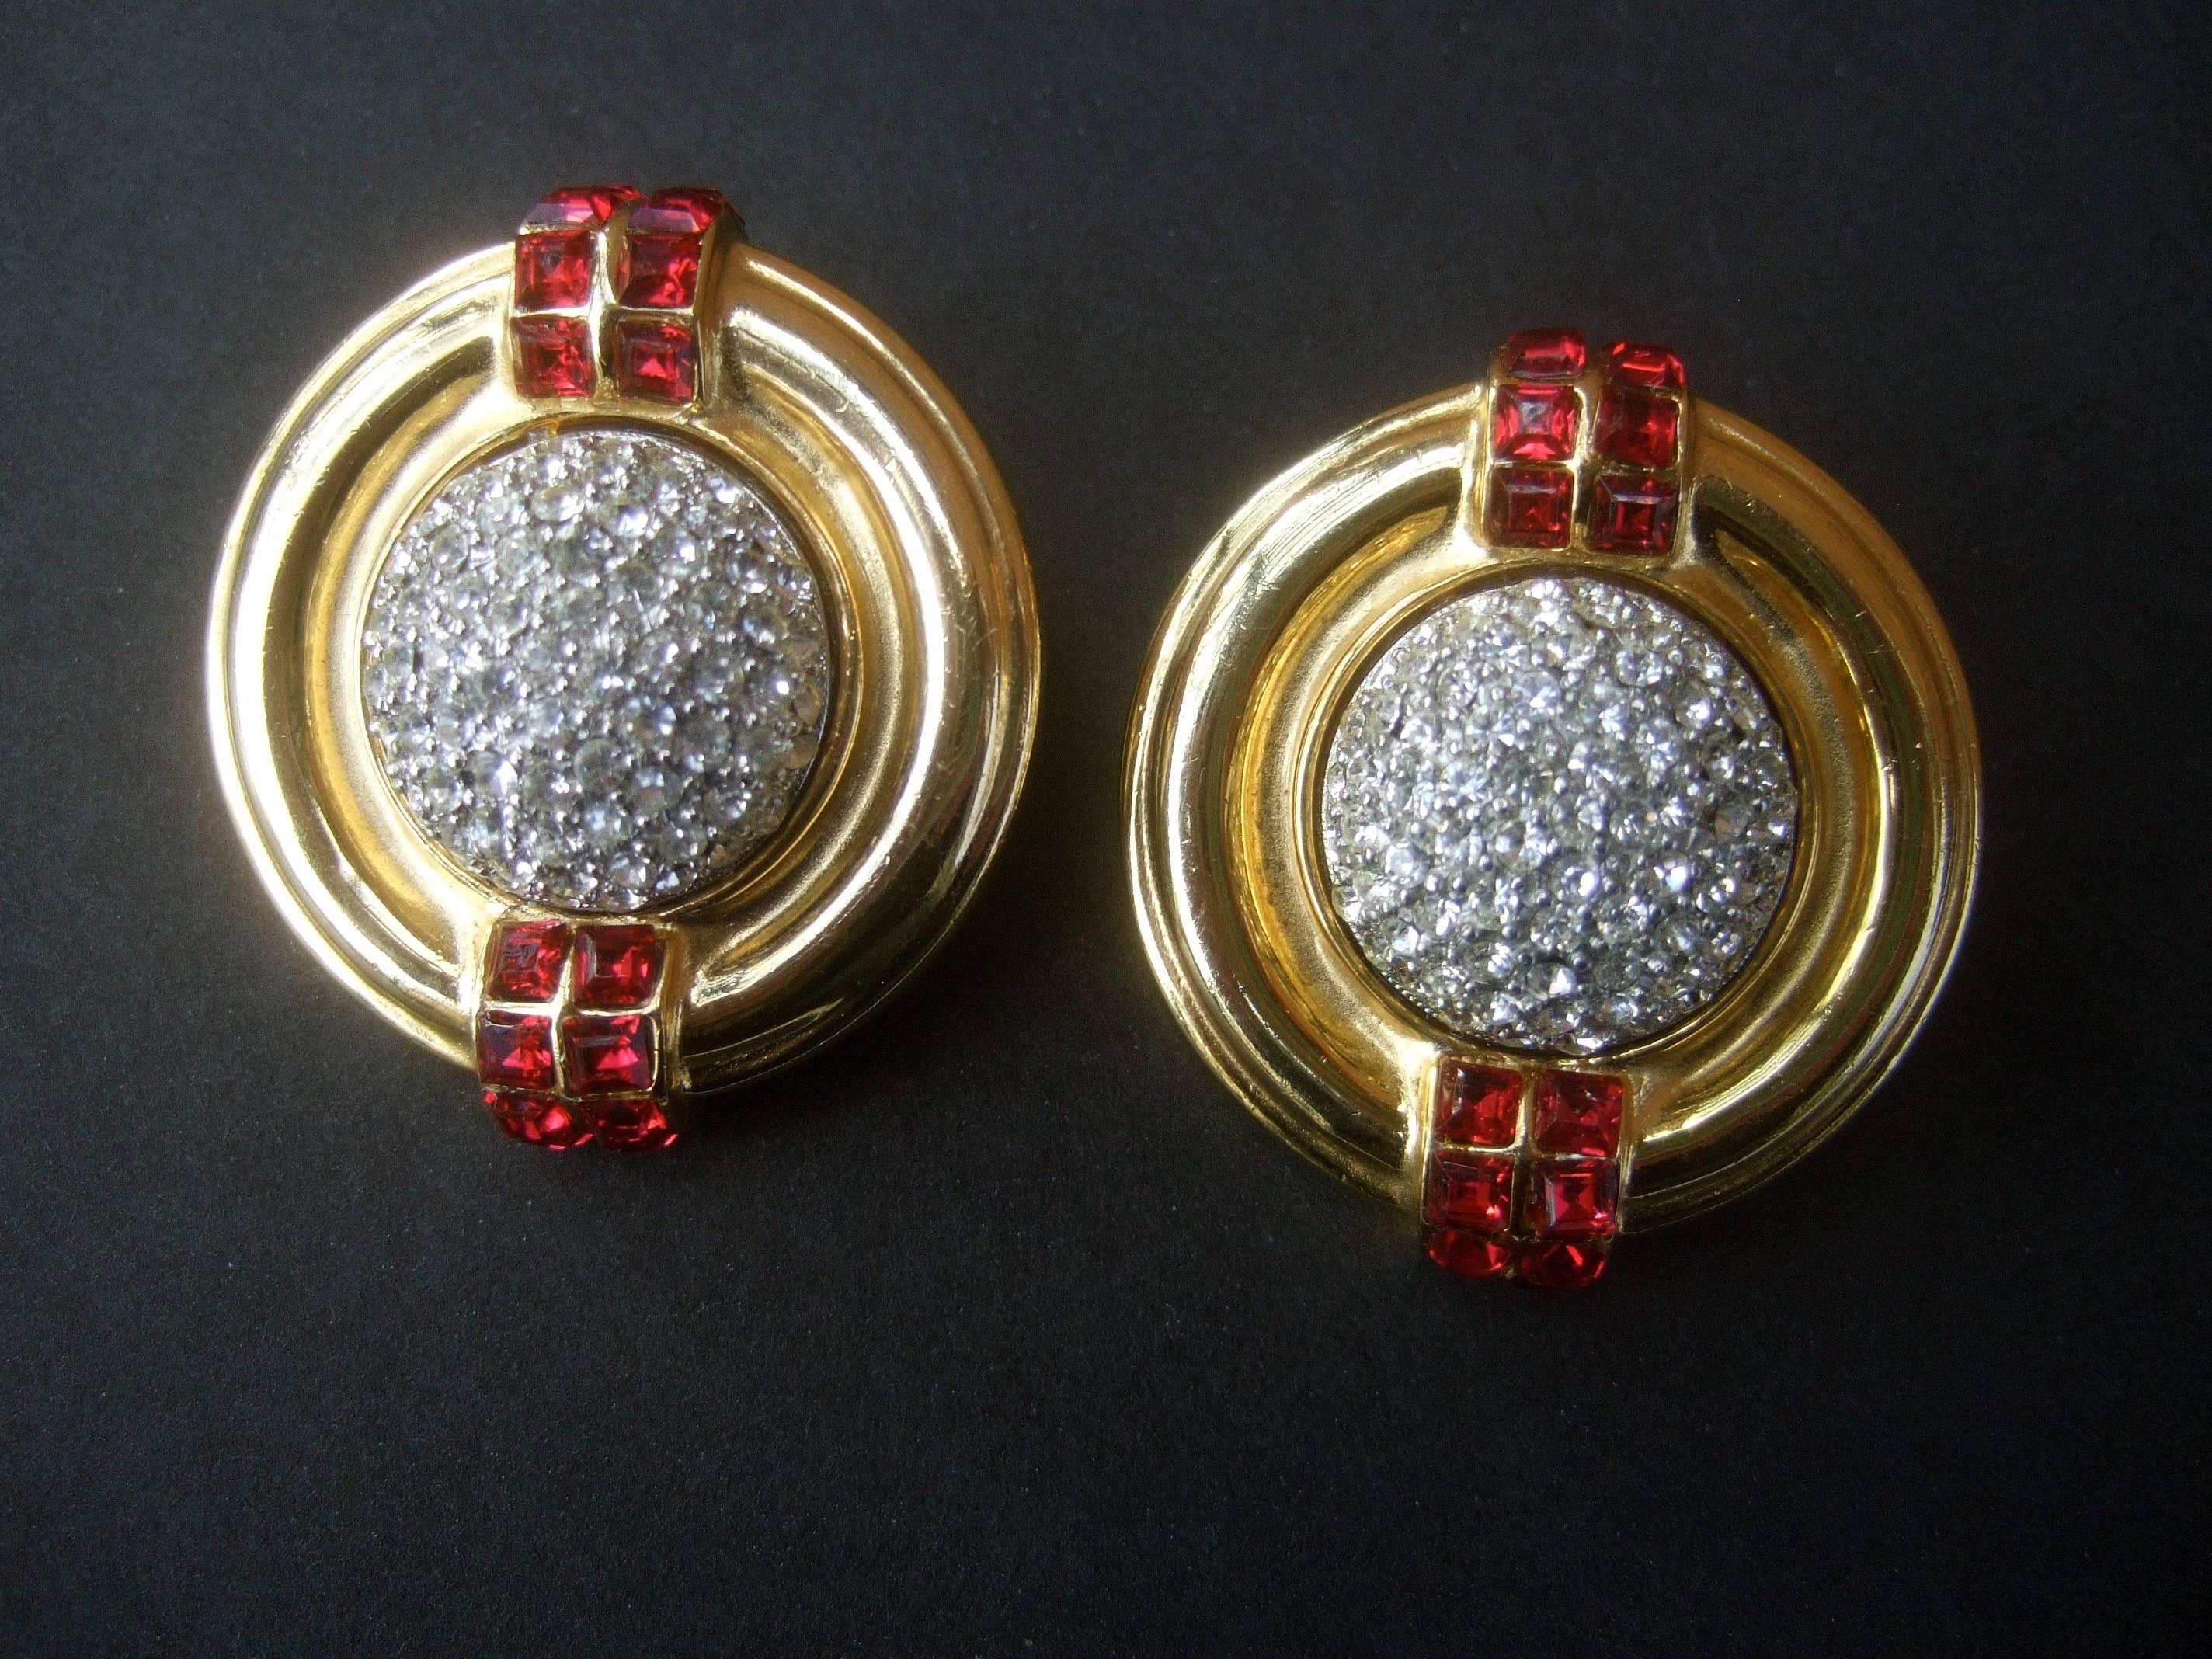 Ben Amun Elegant crystal encrusted art deco style clip earrings c 1980s
The stylish clip on designer earrings are encrusted with a dome
of glittering pave crystals 

The shiny gilt metal edges are embellished with two rows 
of ruby color glass